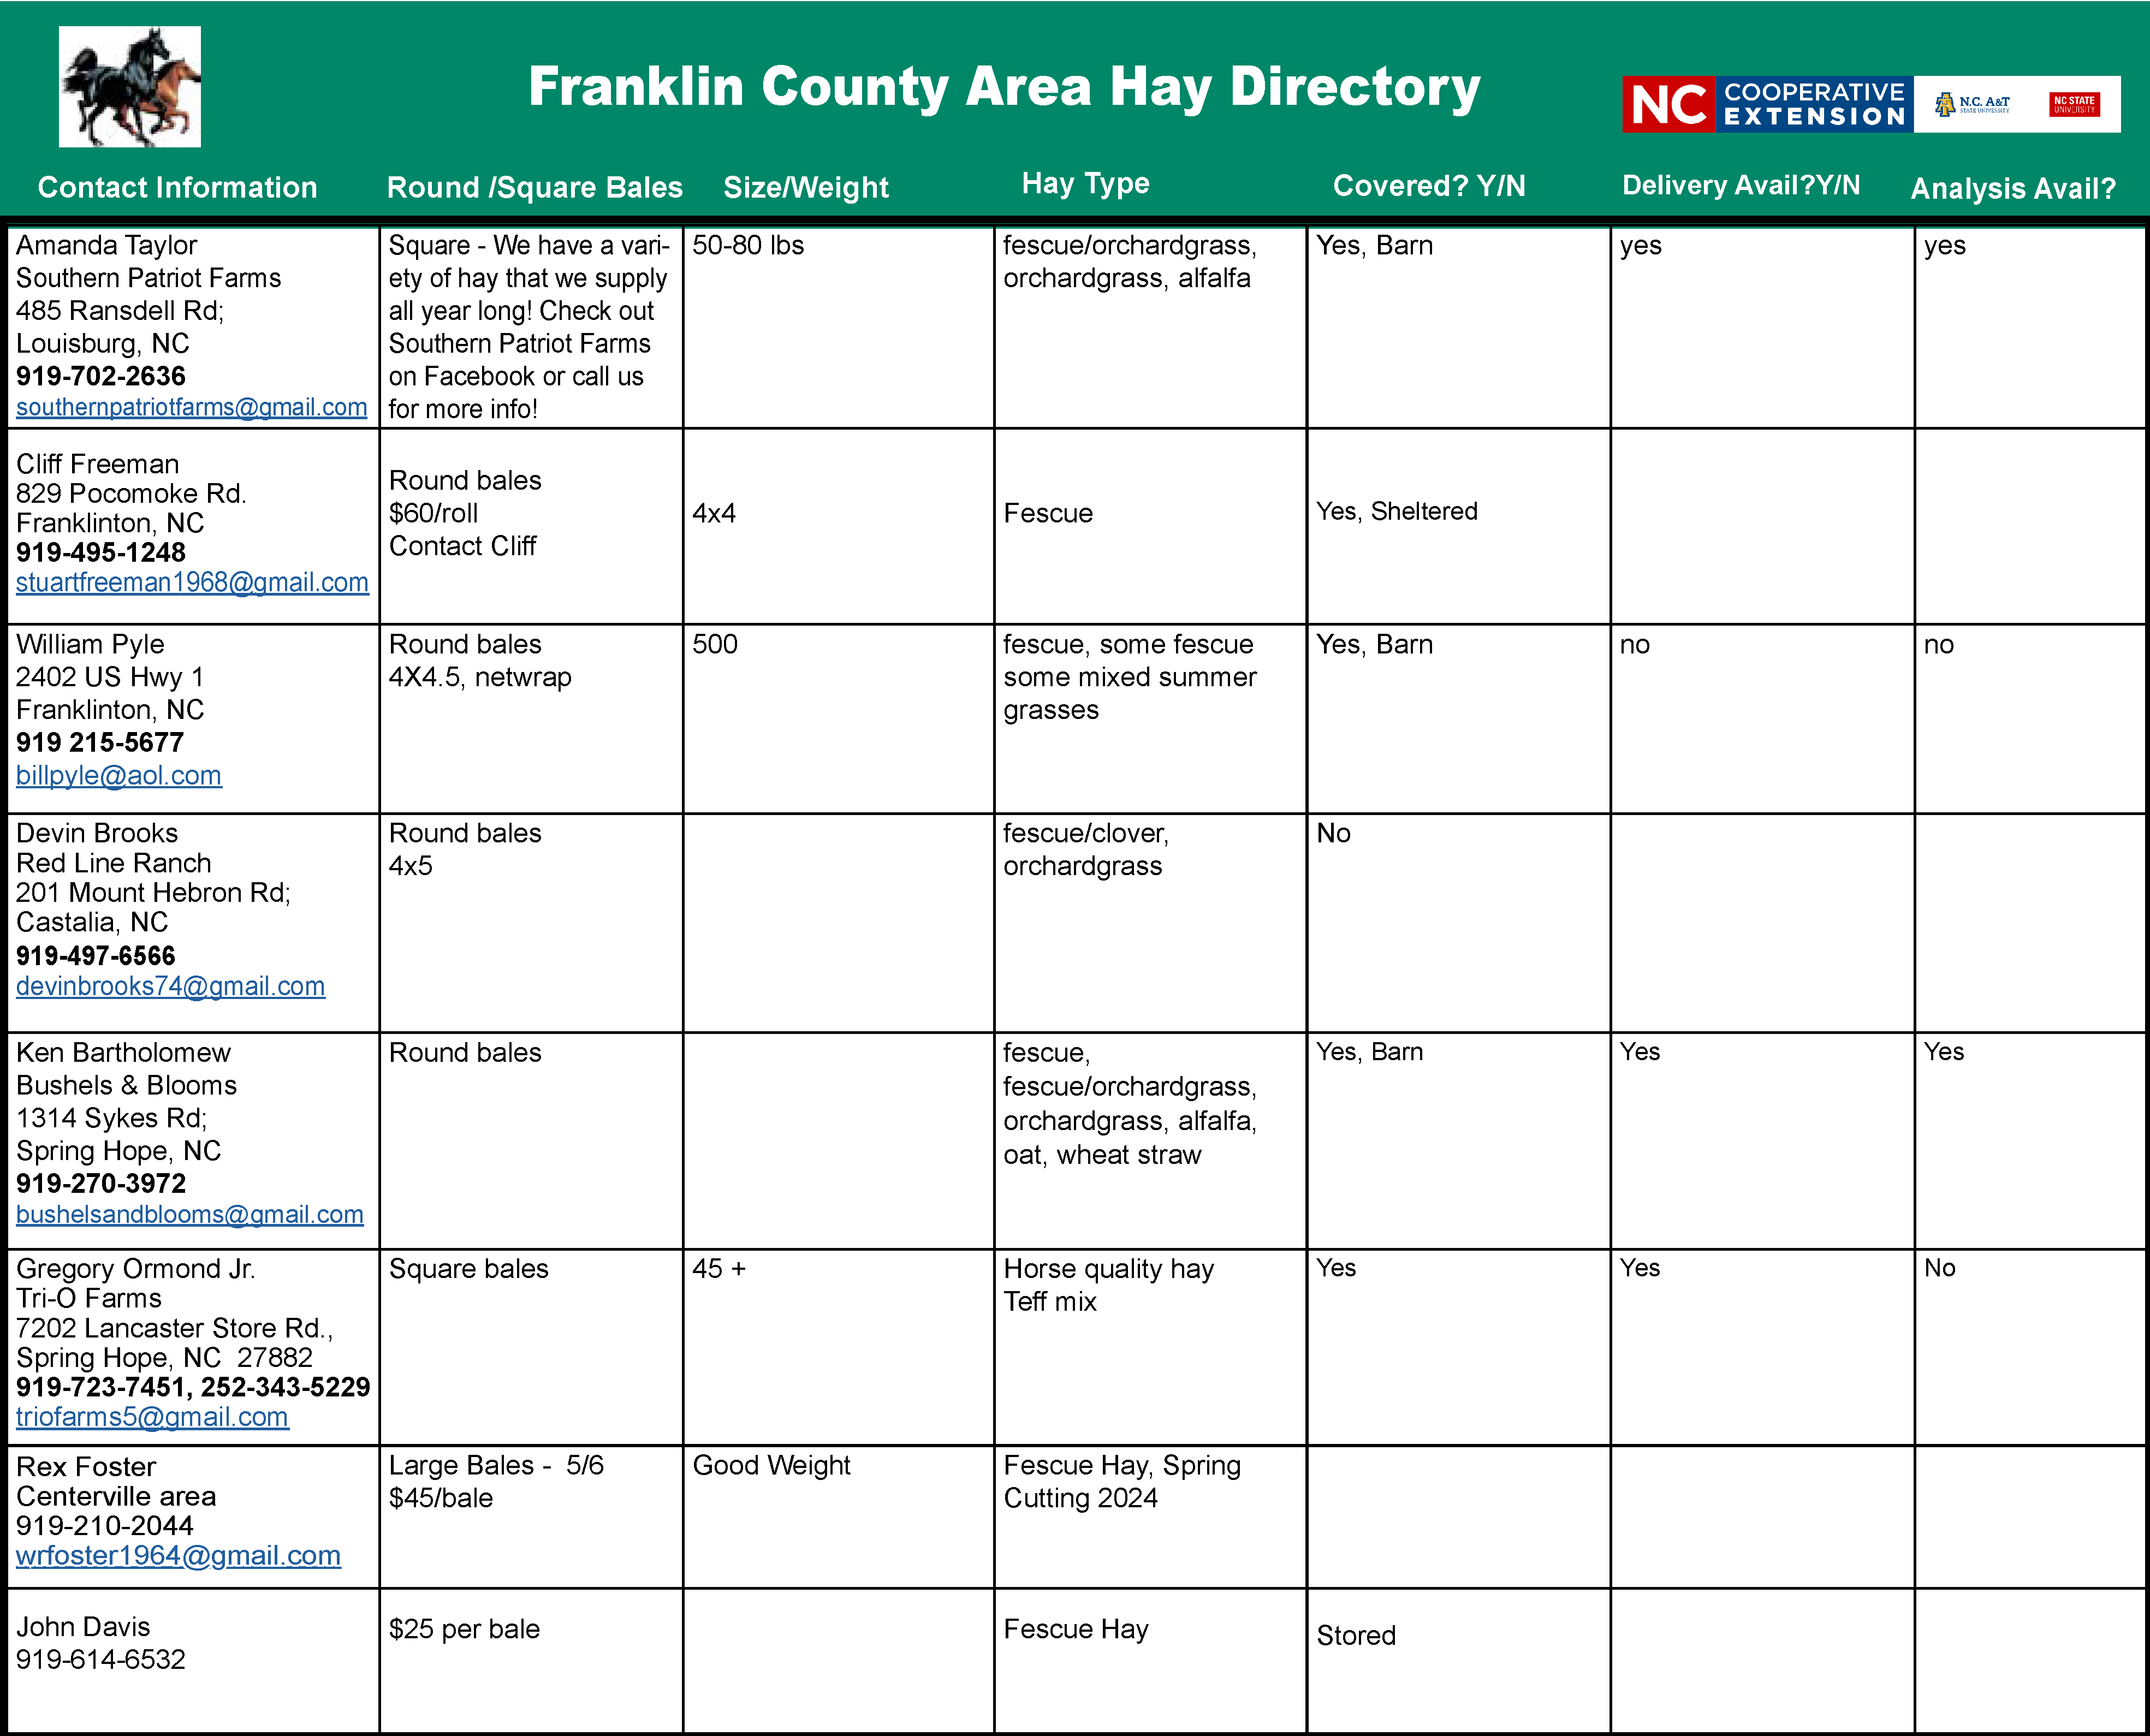 Franklin County Hay Directiry with hay details and contact info.